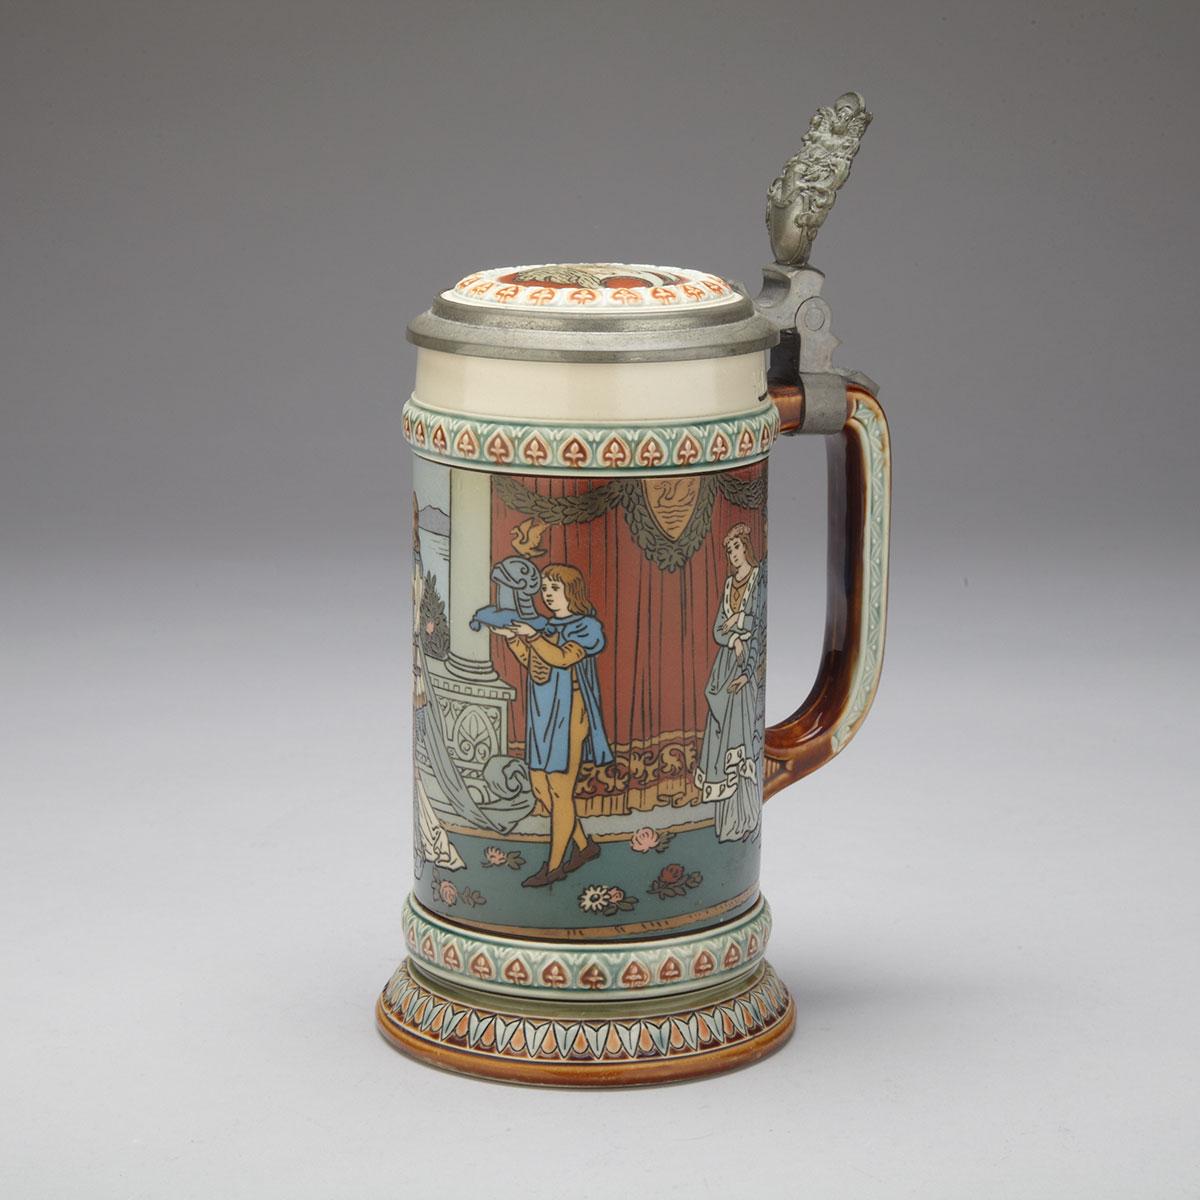 Pewter Mounted Mettlach Stoneware Stein, early 20th century